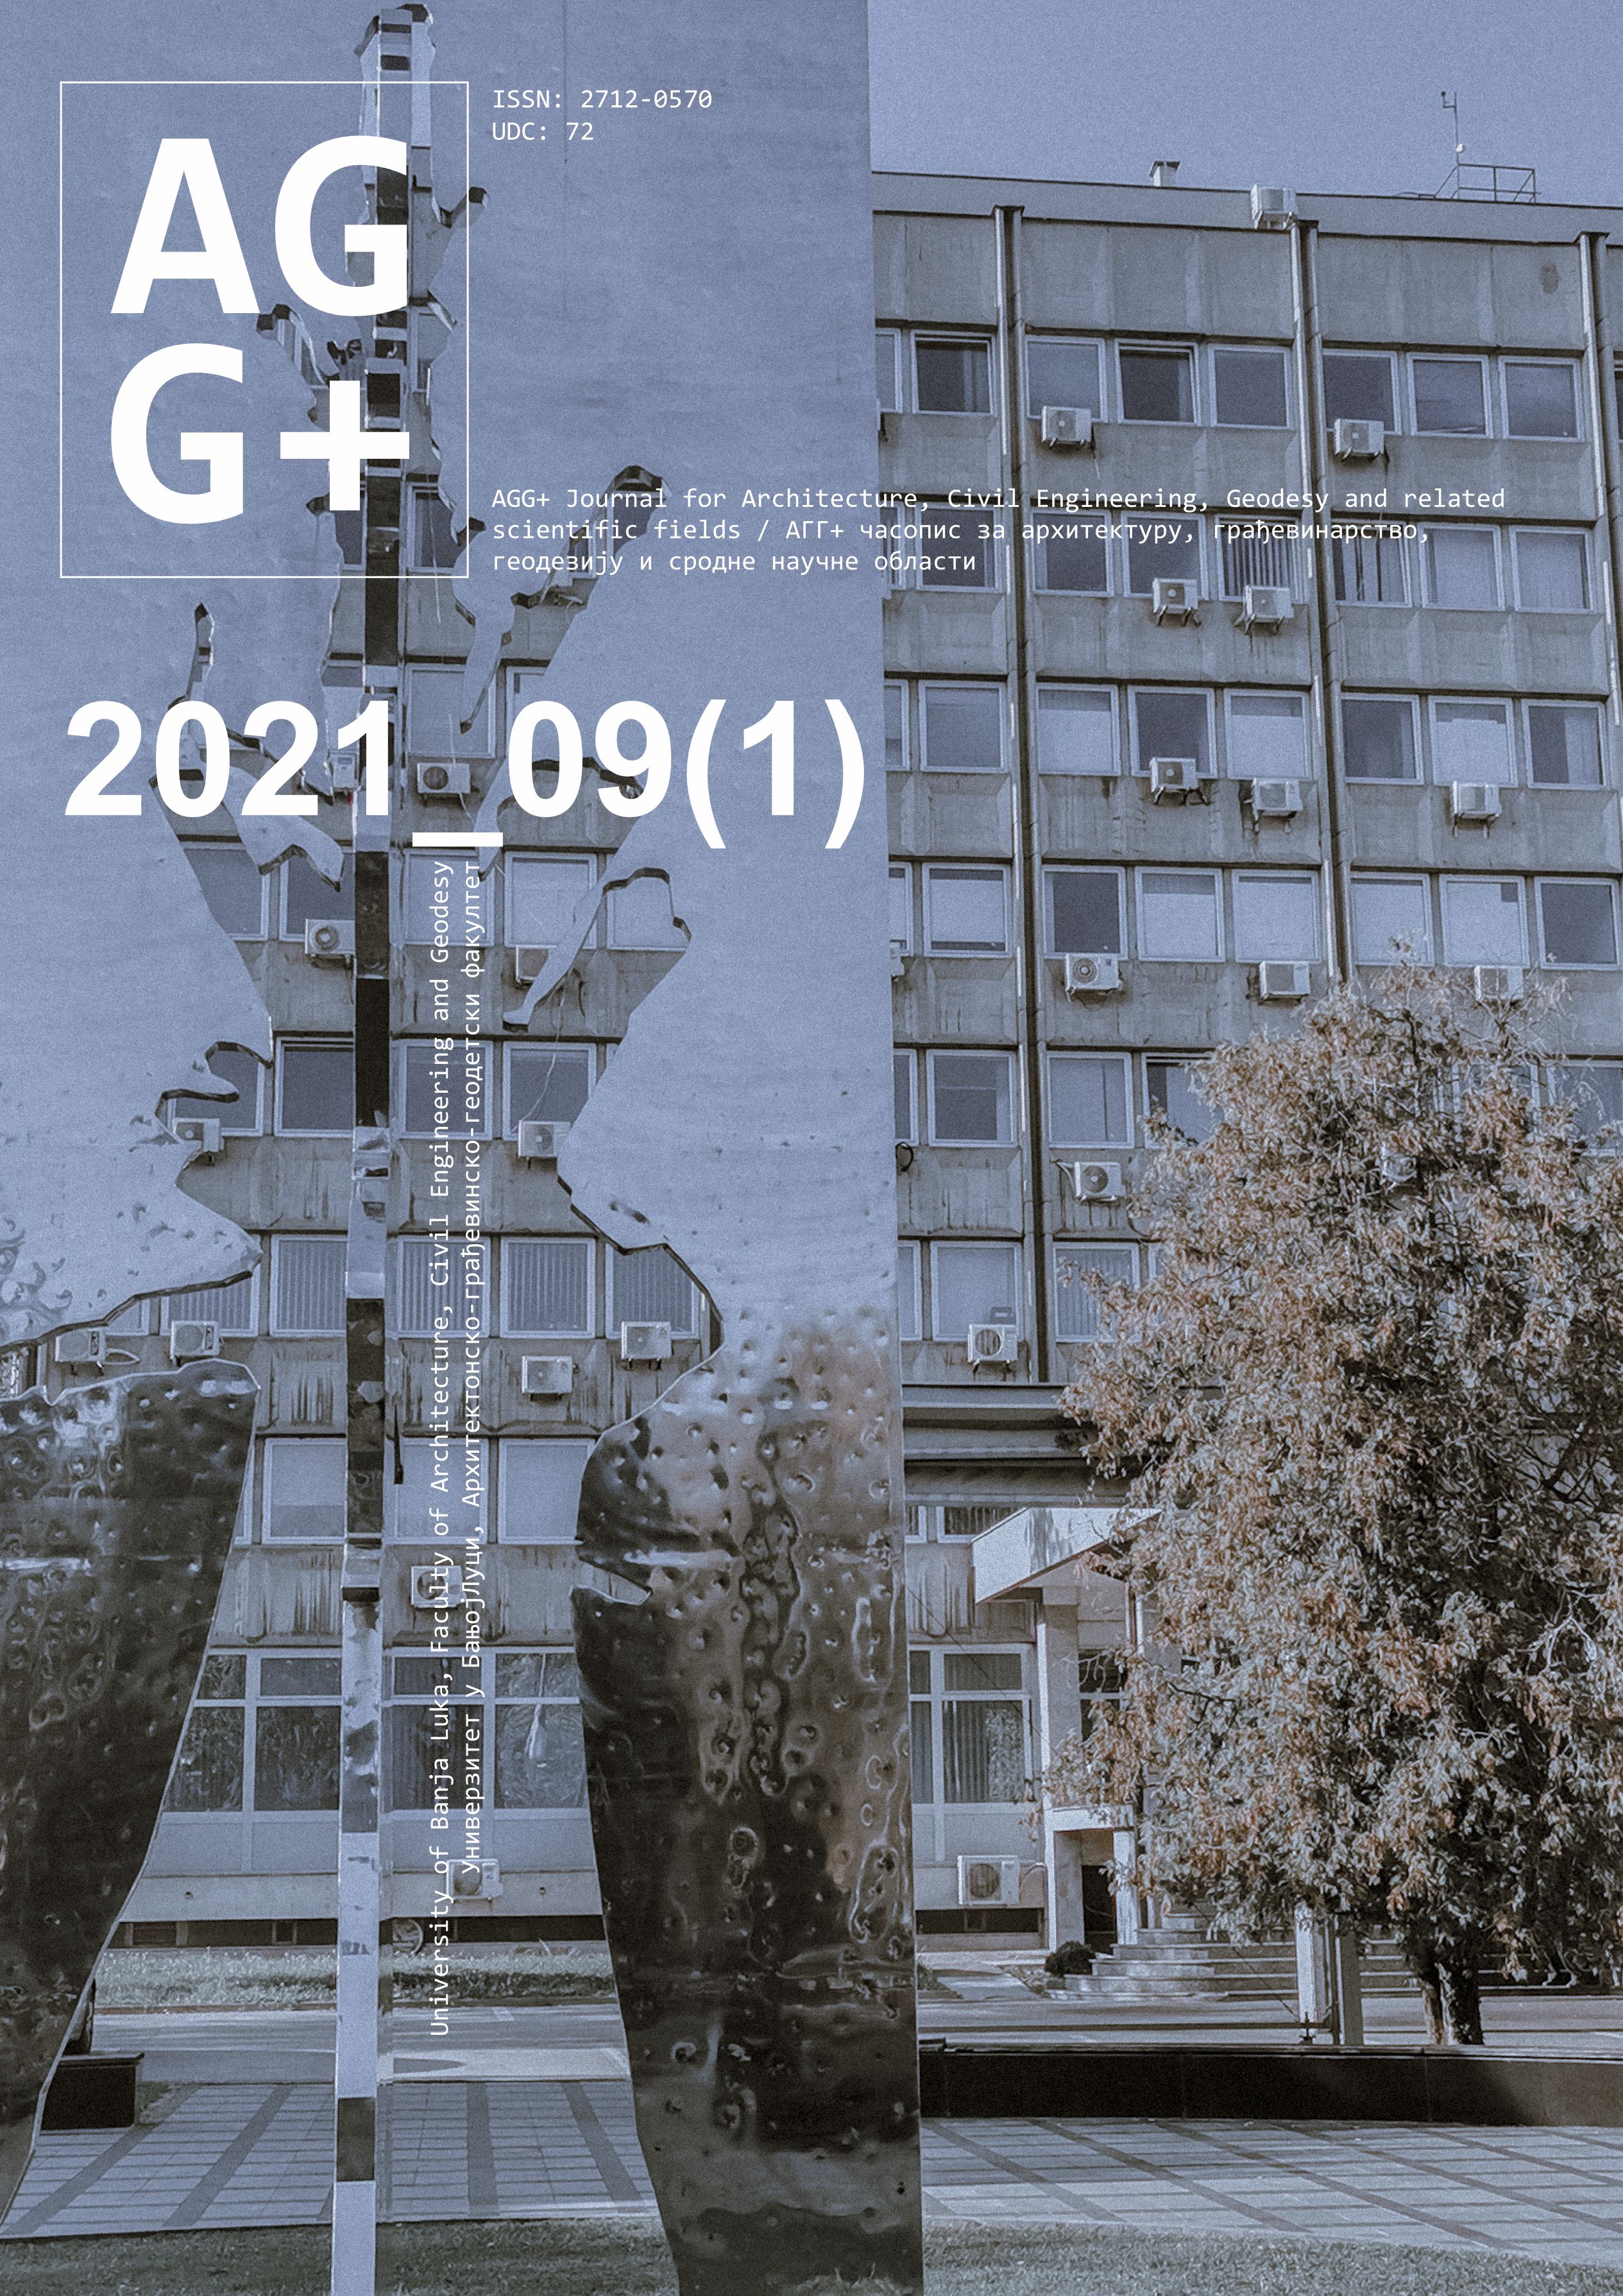 AGG+ Journal for Architecture, Civil Engineering, Geodesy, and Related Scientific Fields